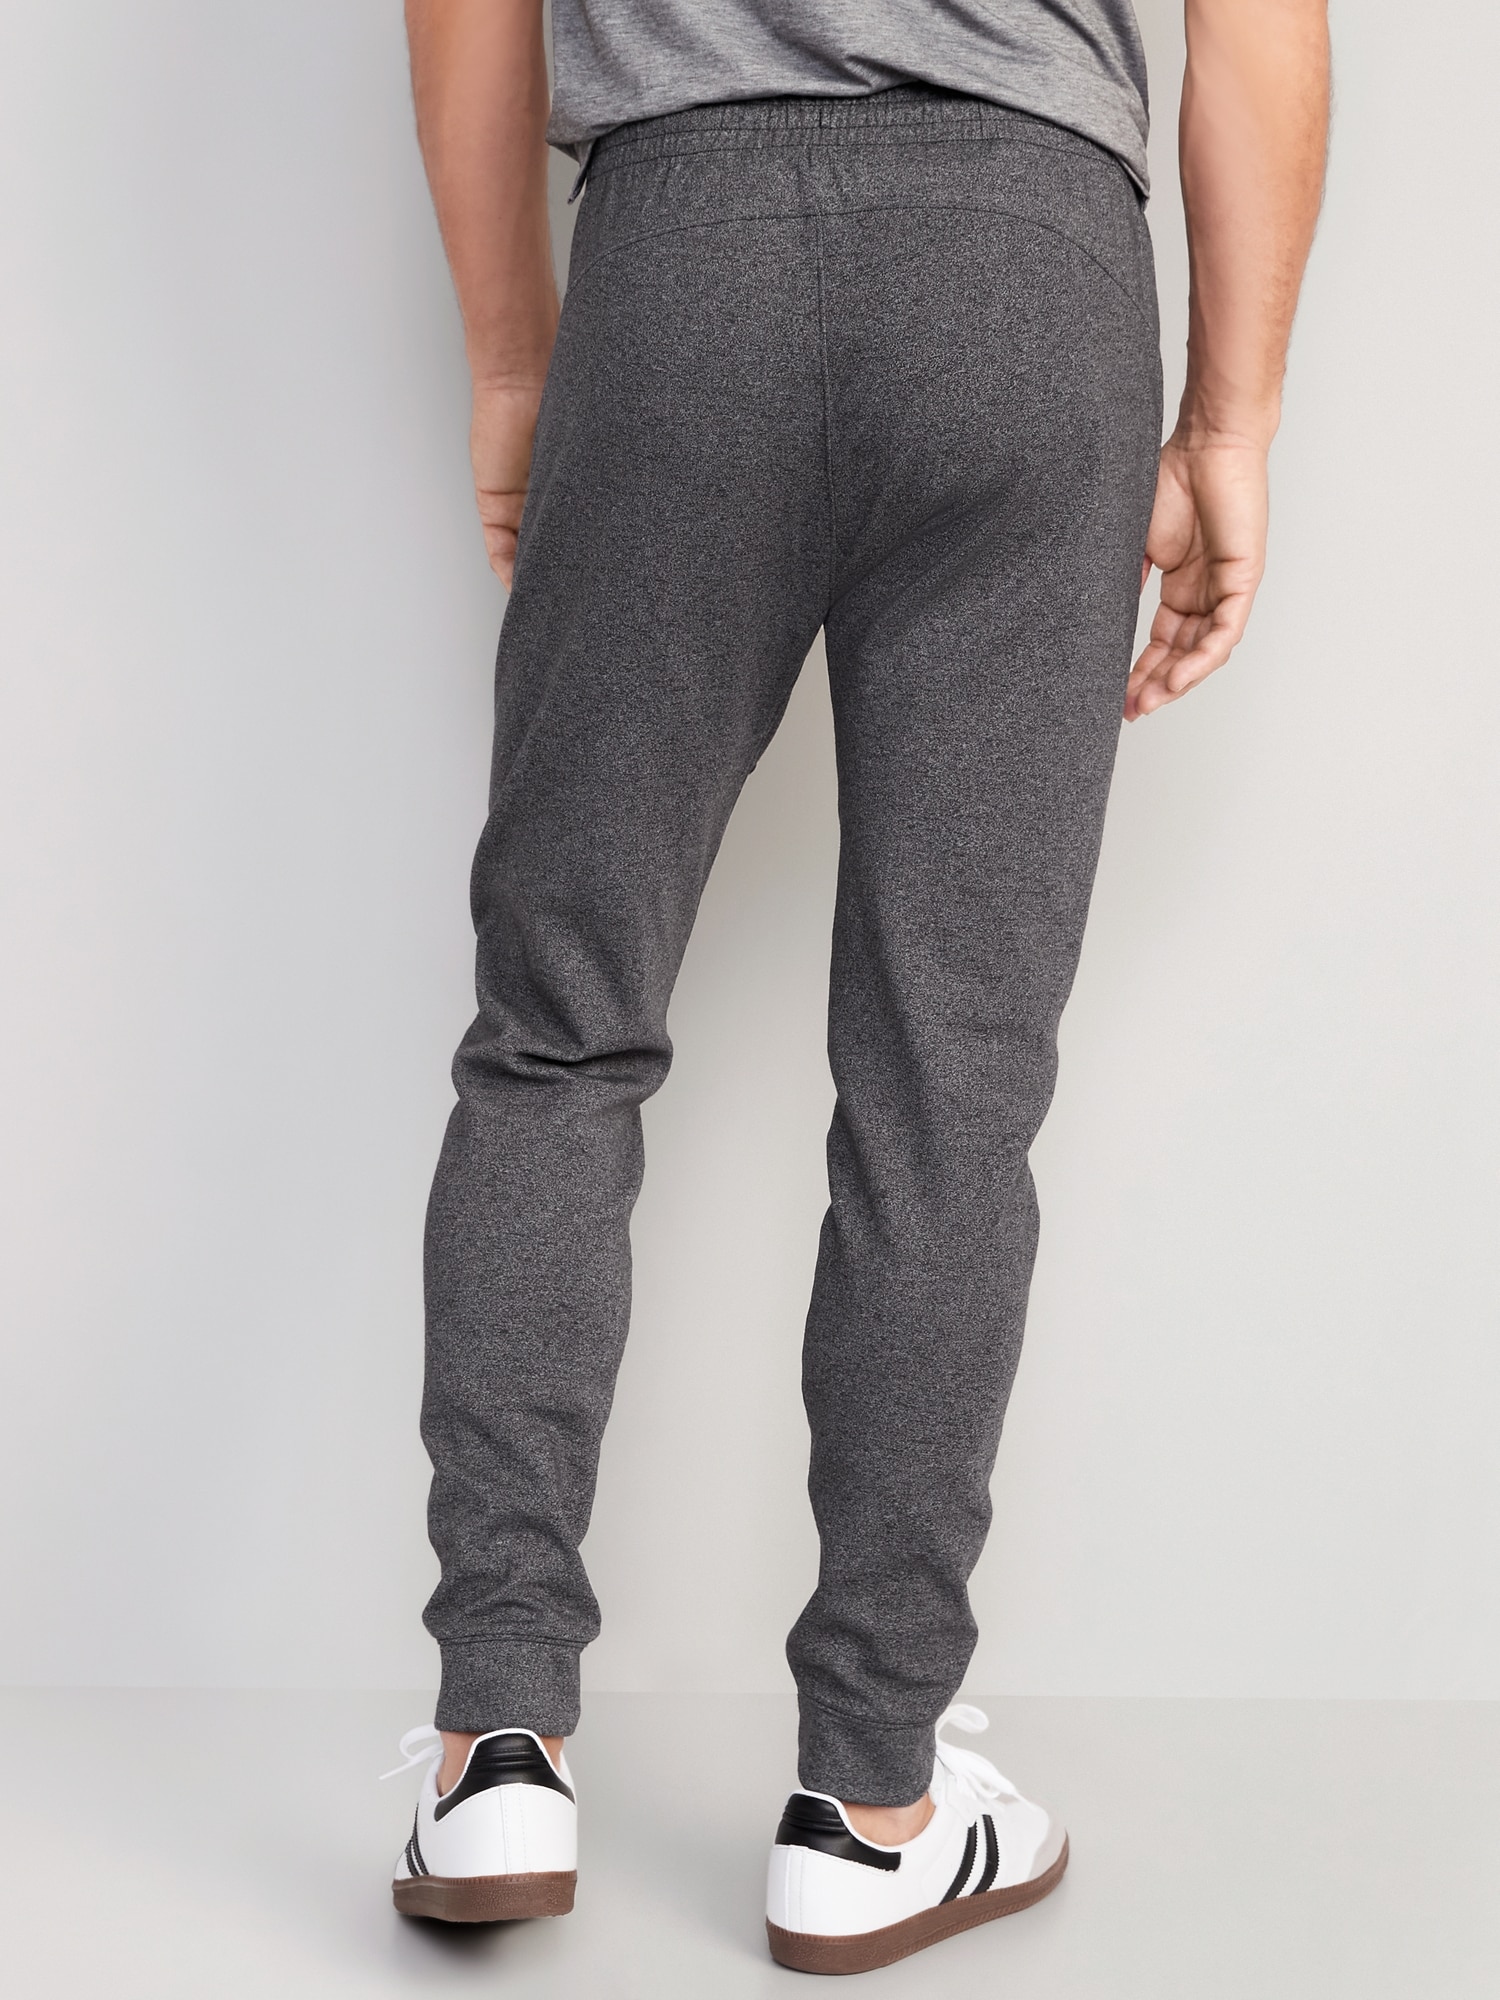 NWT Old Navy Dynamic Fleece Tapered Sweatpants for Men Charcoal